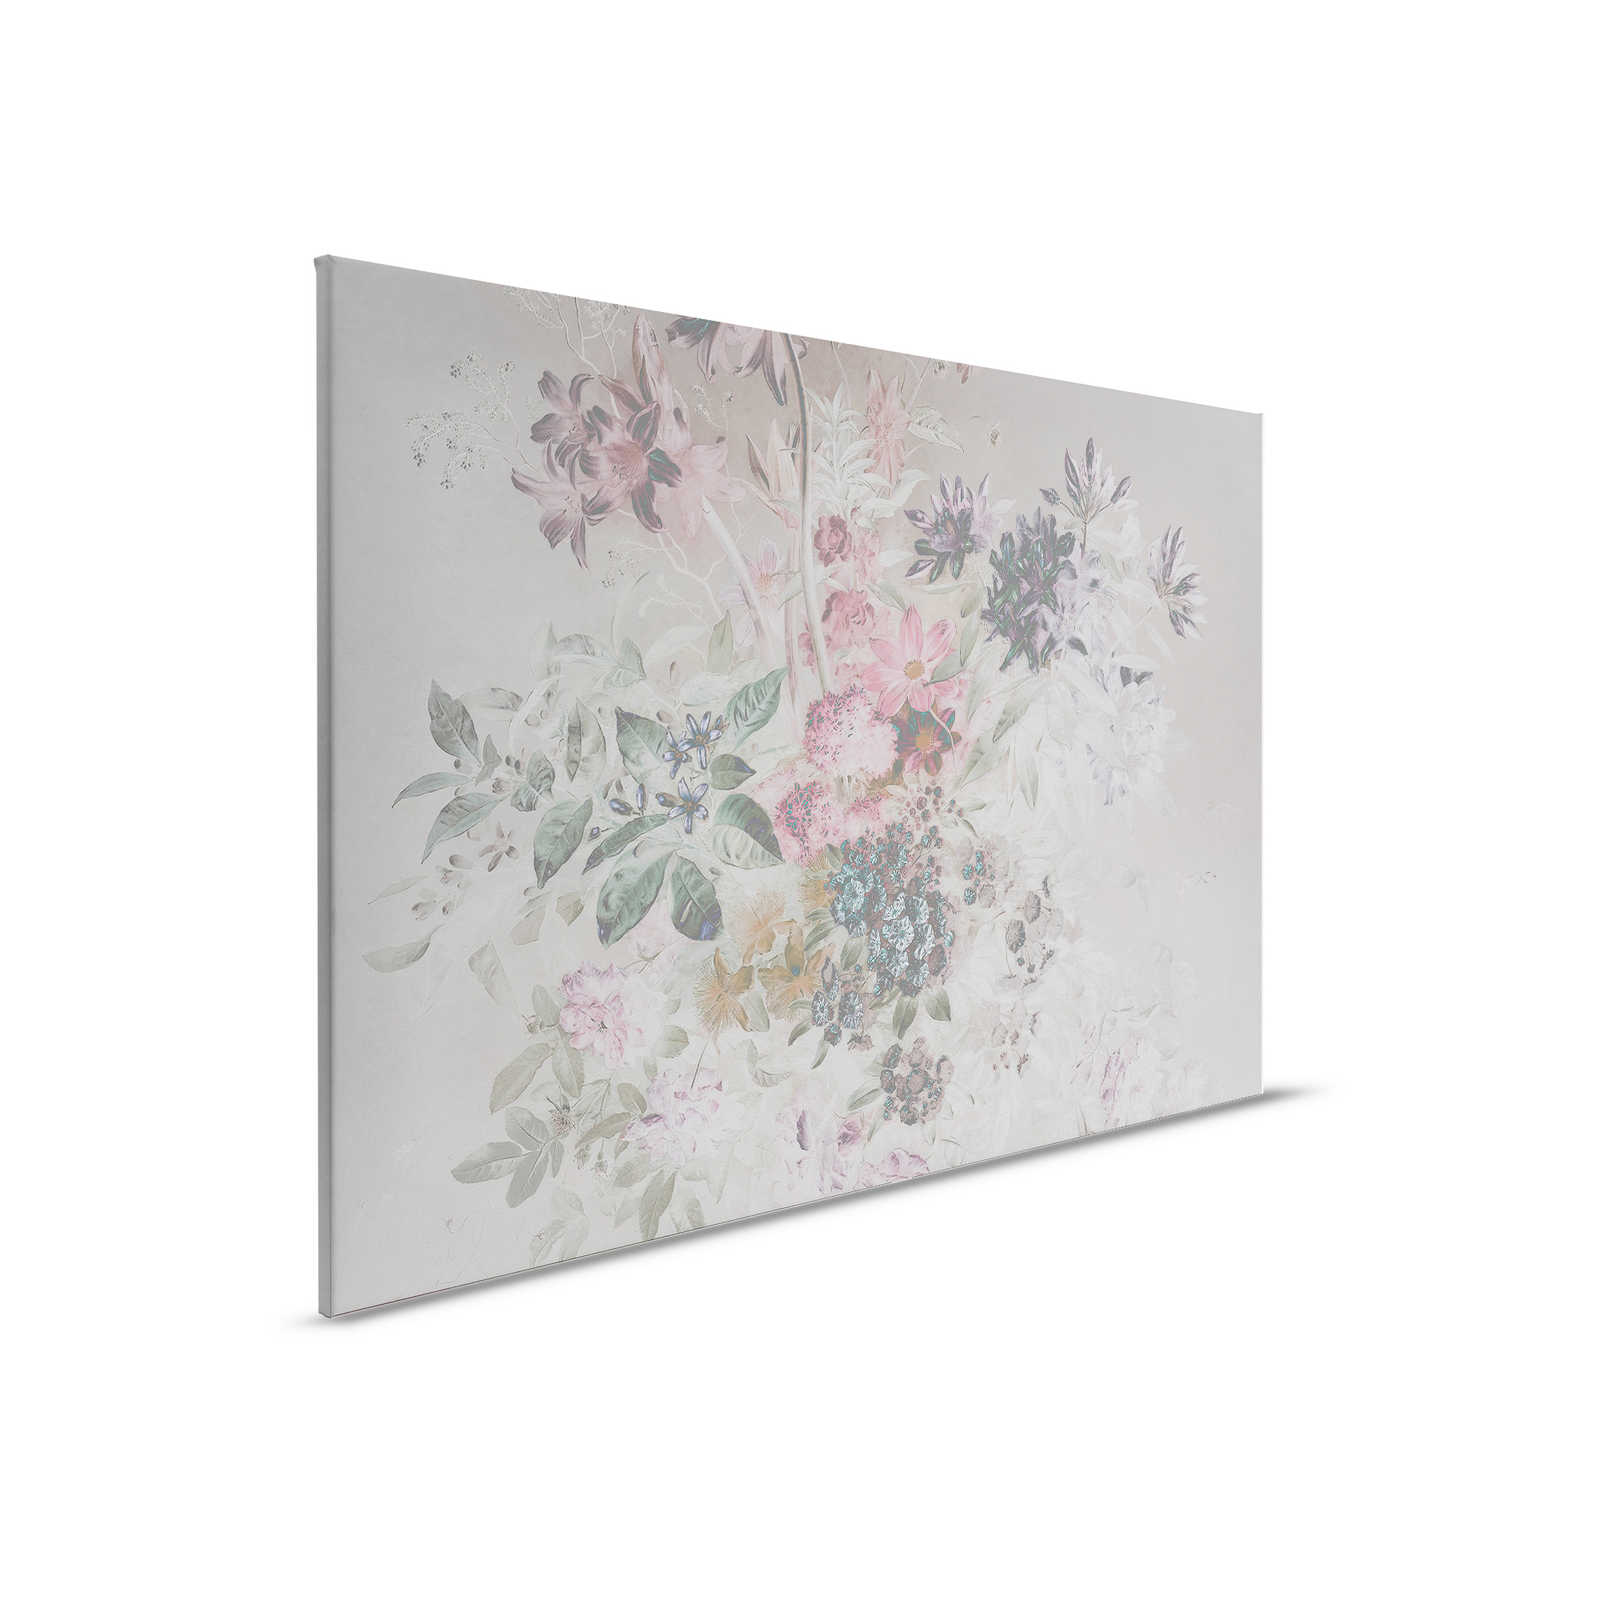 Flowers canvas picture with pastel design | pink, grey - 0.90 m x 0.60 m
